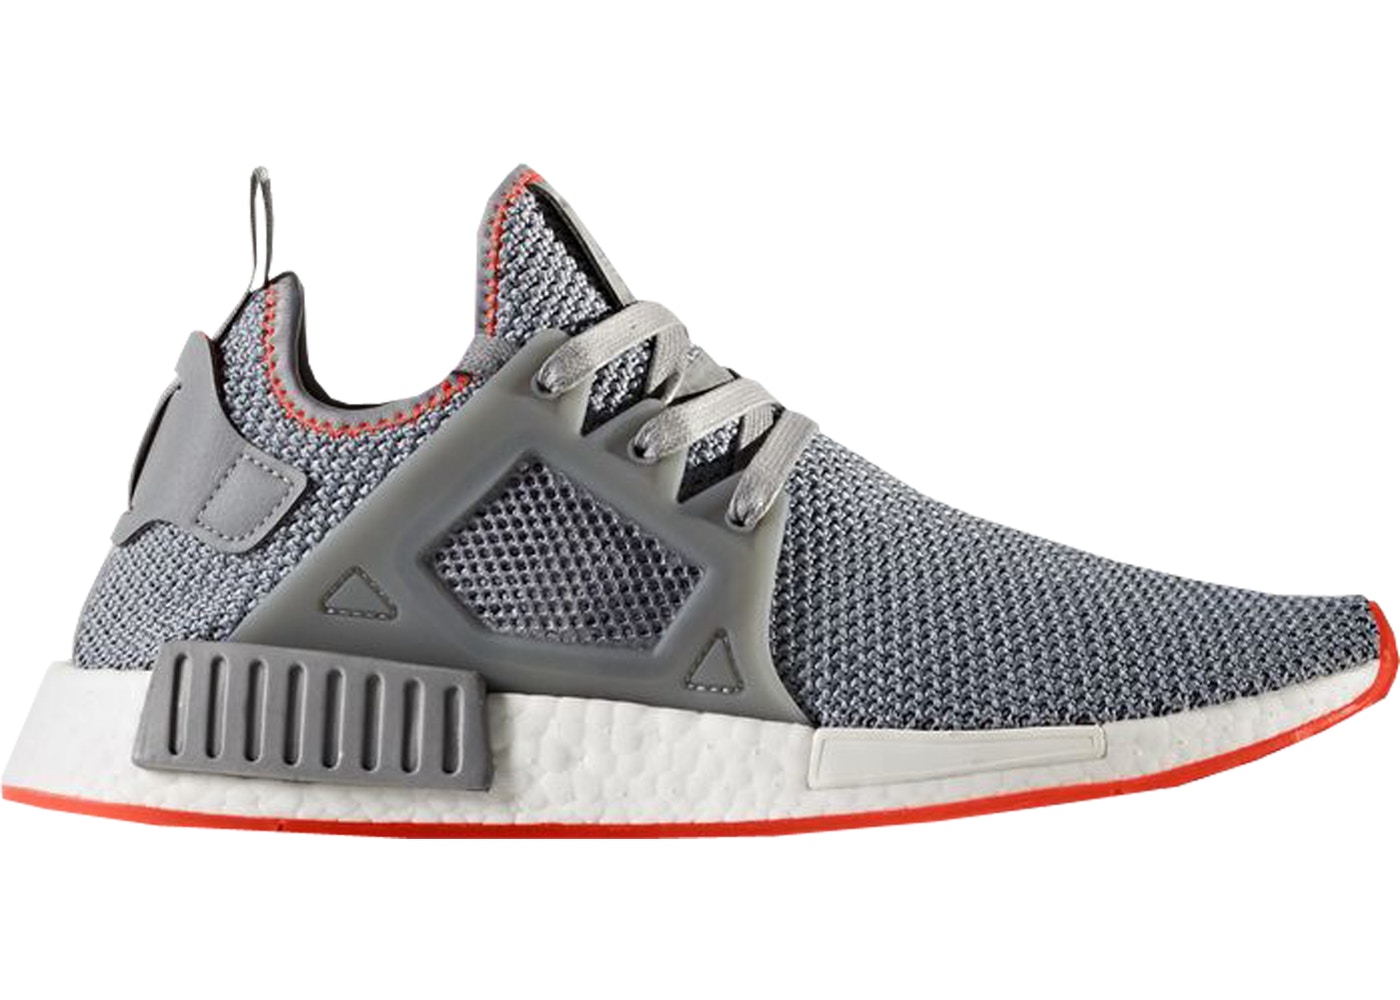 Buy Adidas NMD XR1 Only $ 66 Today Runrepeat